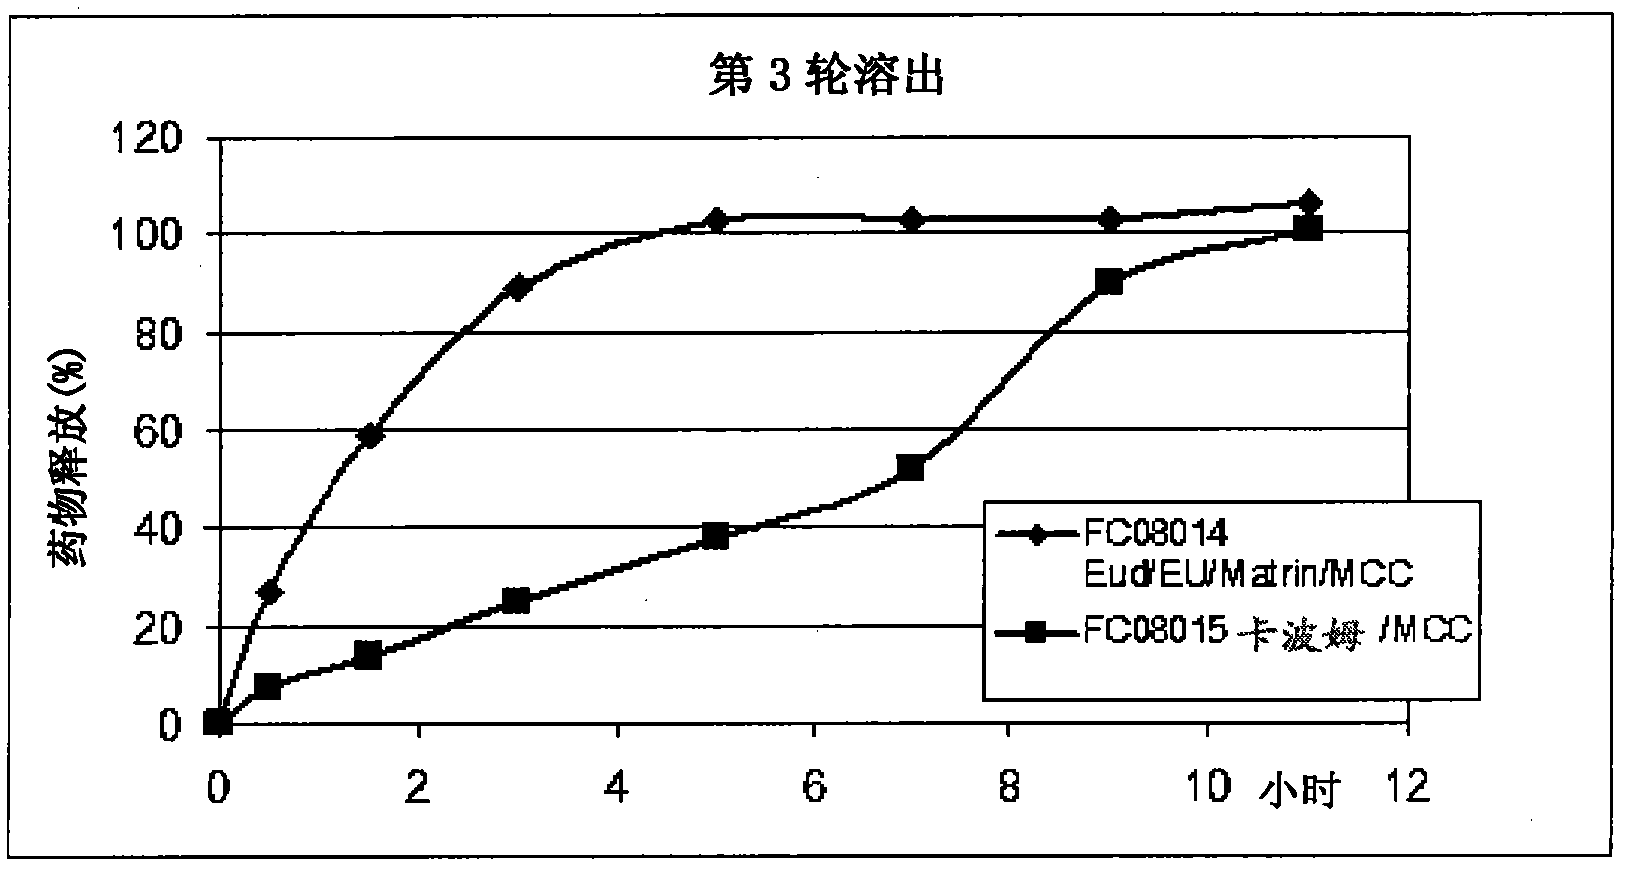 Formulations of 5-fluorocytosine and uses thereof